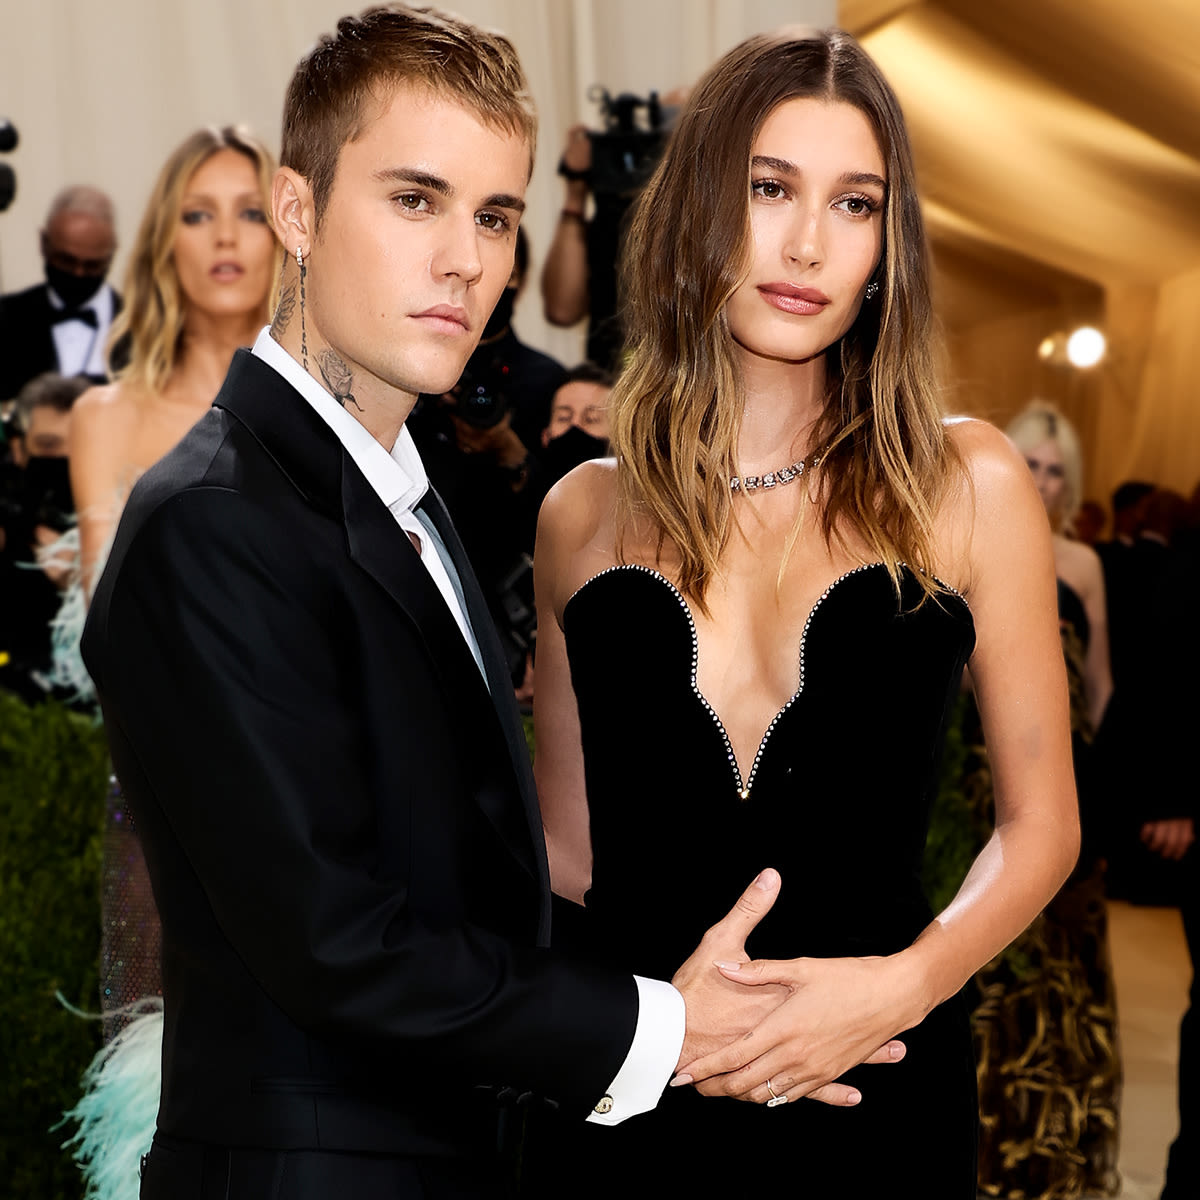 Say That You Love This Photo of Pregnant Hailey Bieber Baring Her Baby Bump During Trip With Justin - E! Online